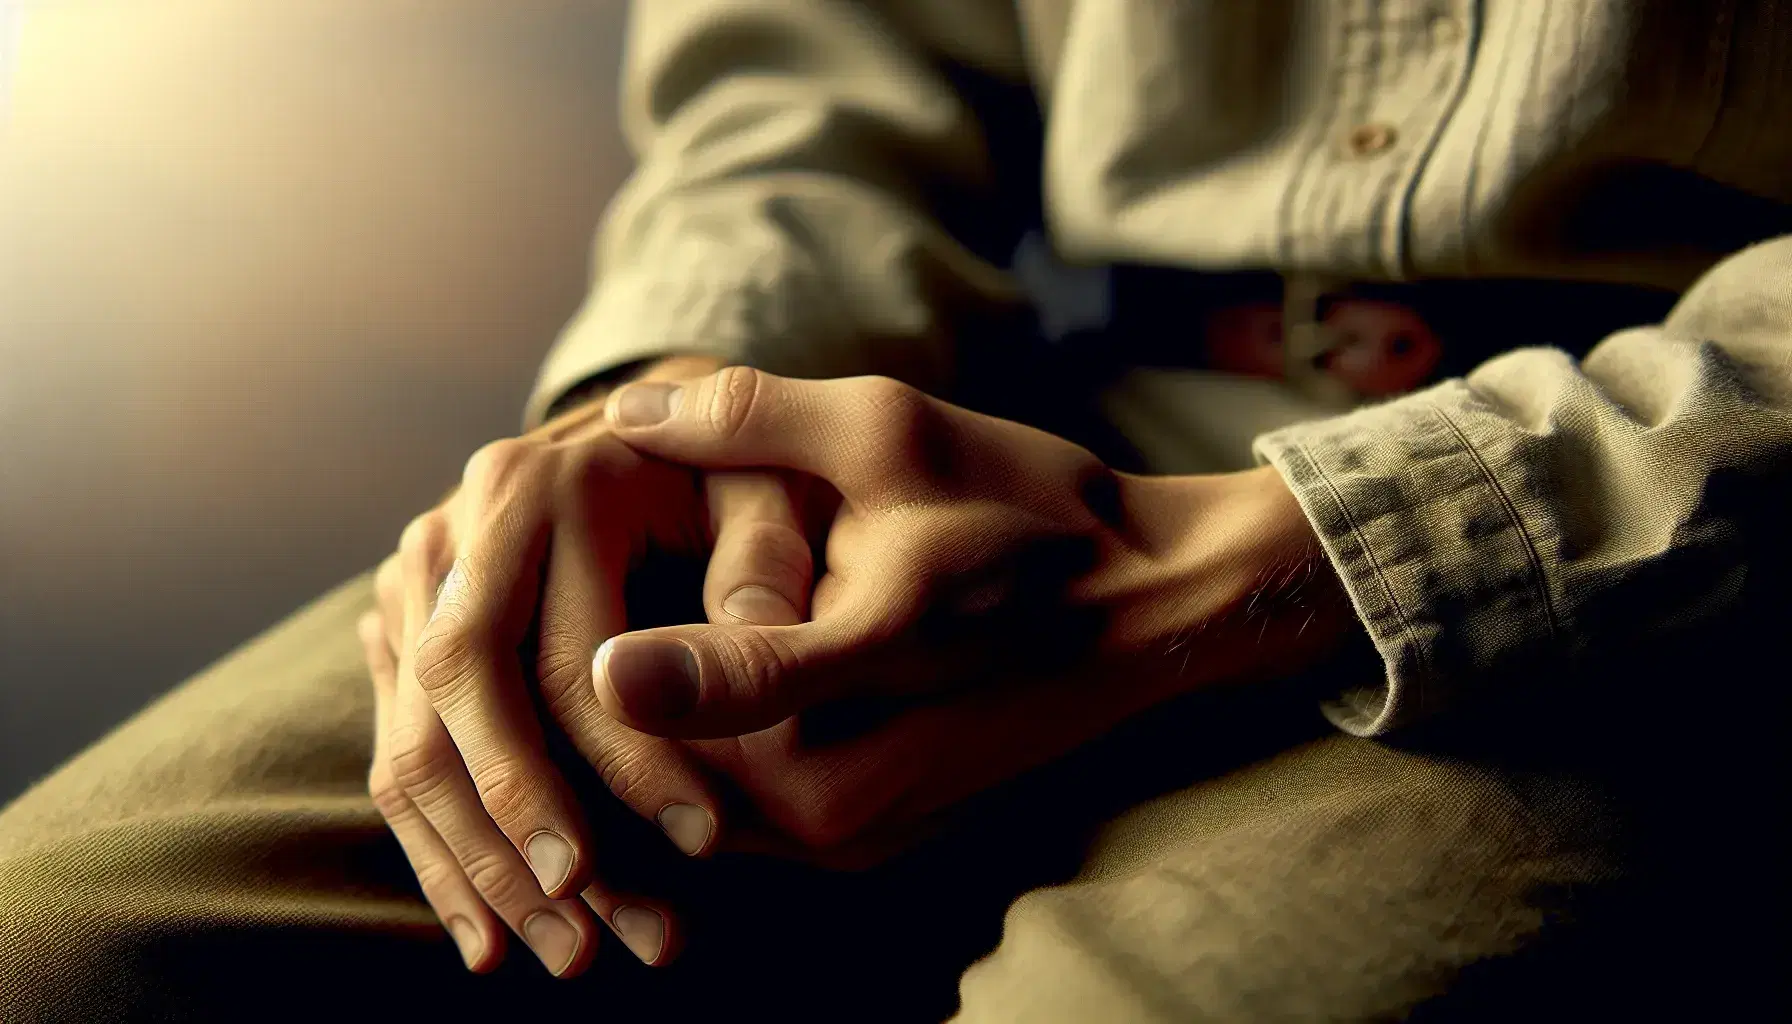 Overlapping adult hands with signs of age, placed on neutral blurred background, soft lighting emphasizing texture and shadows.